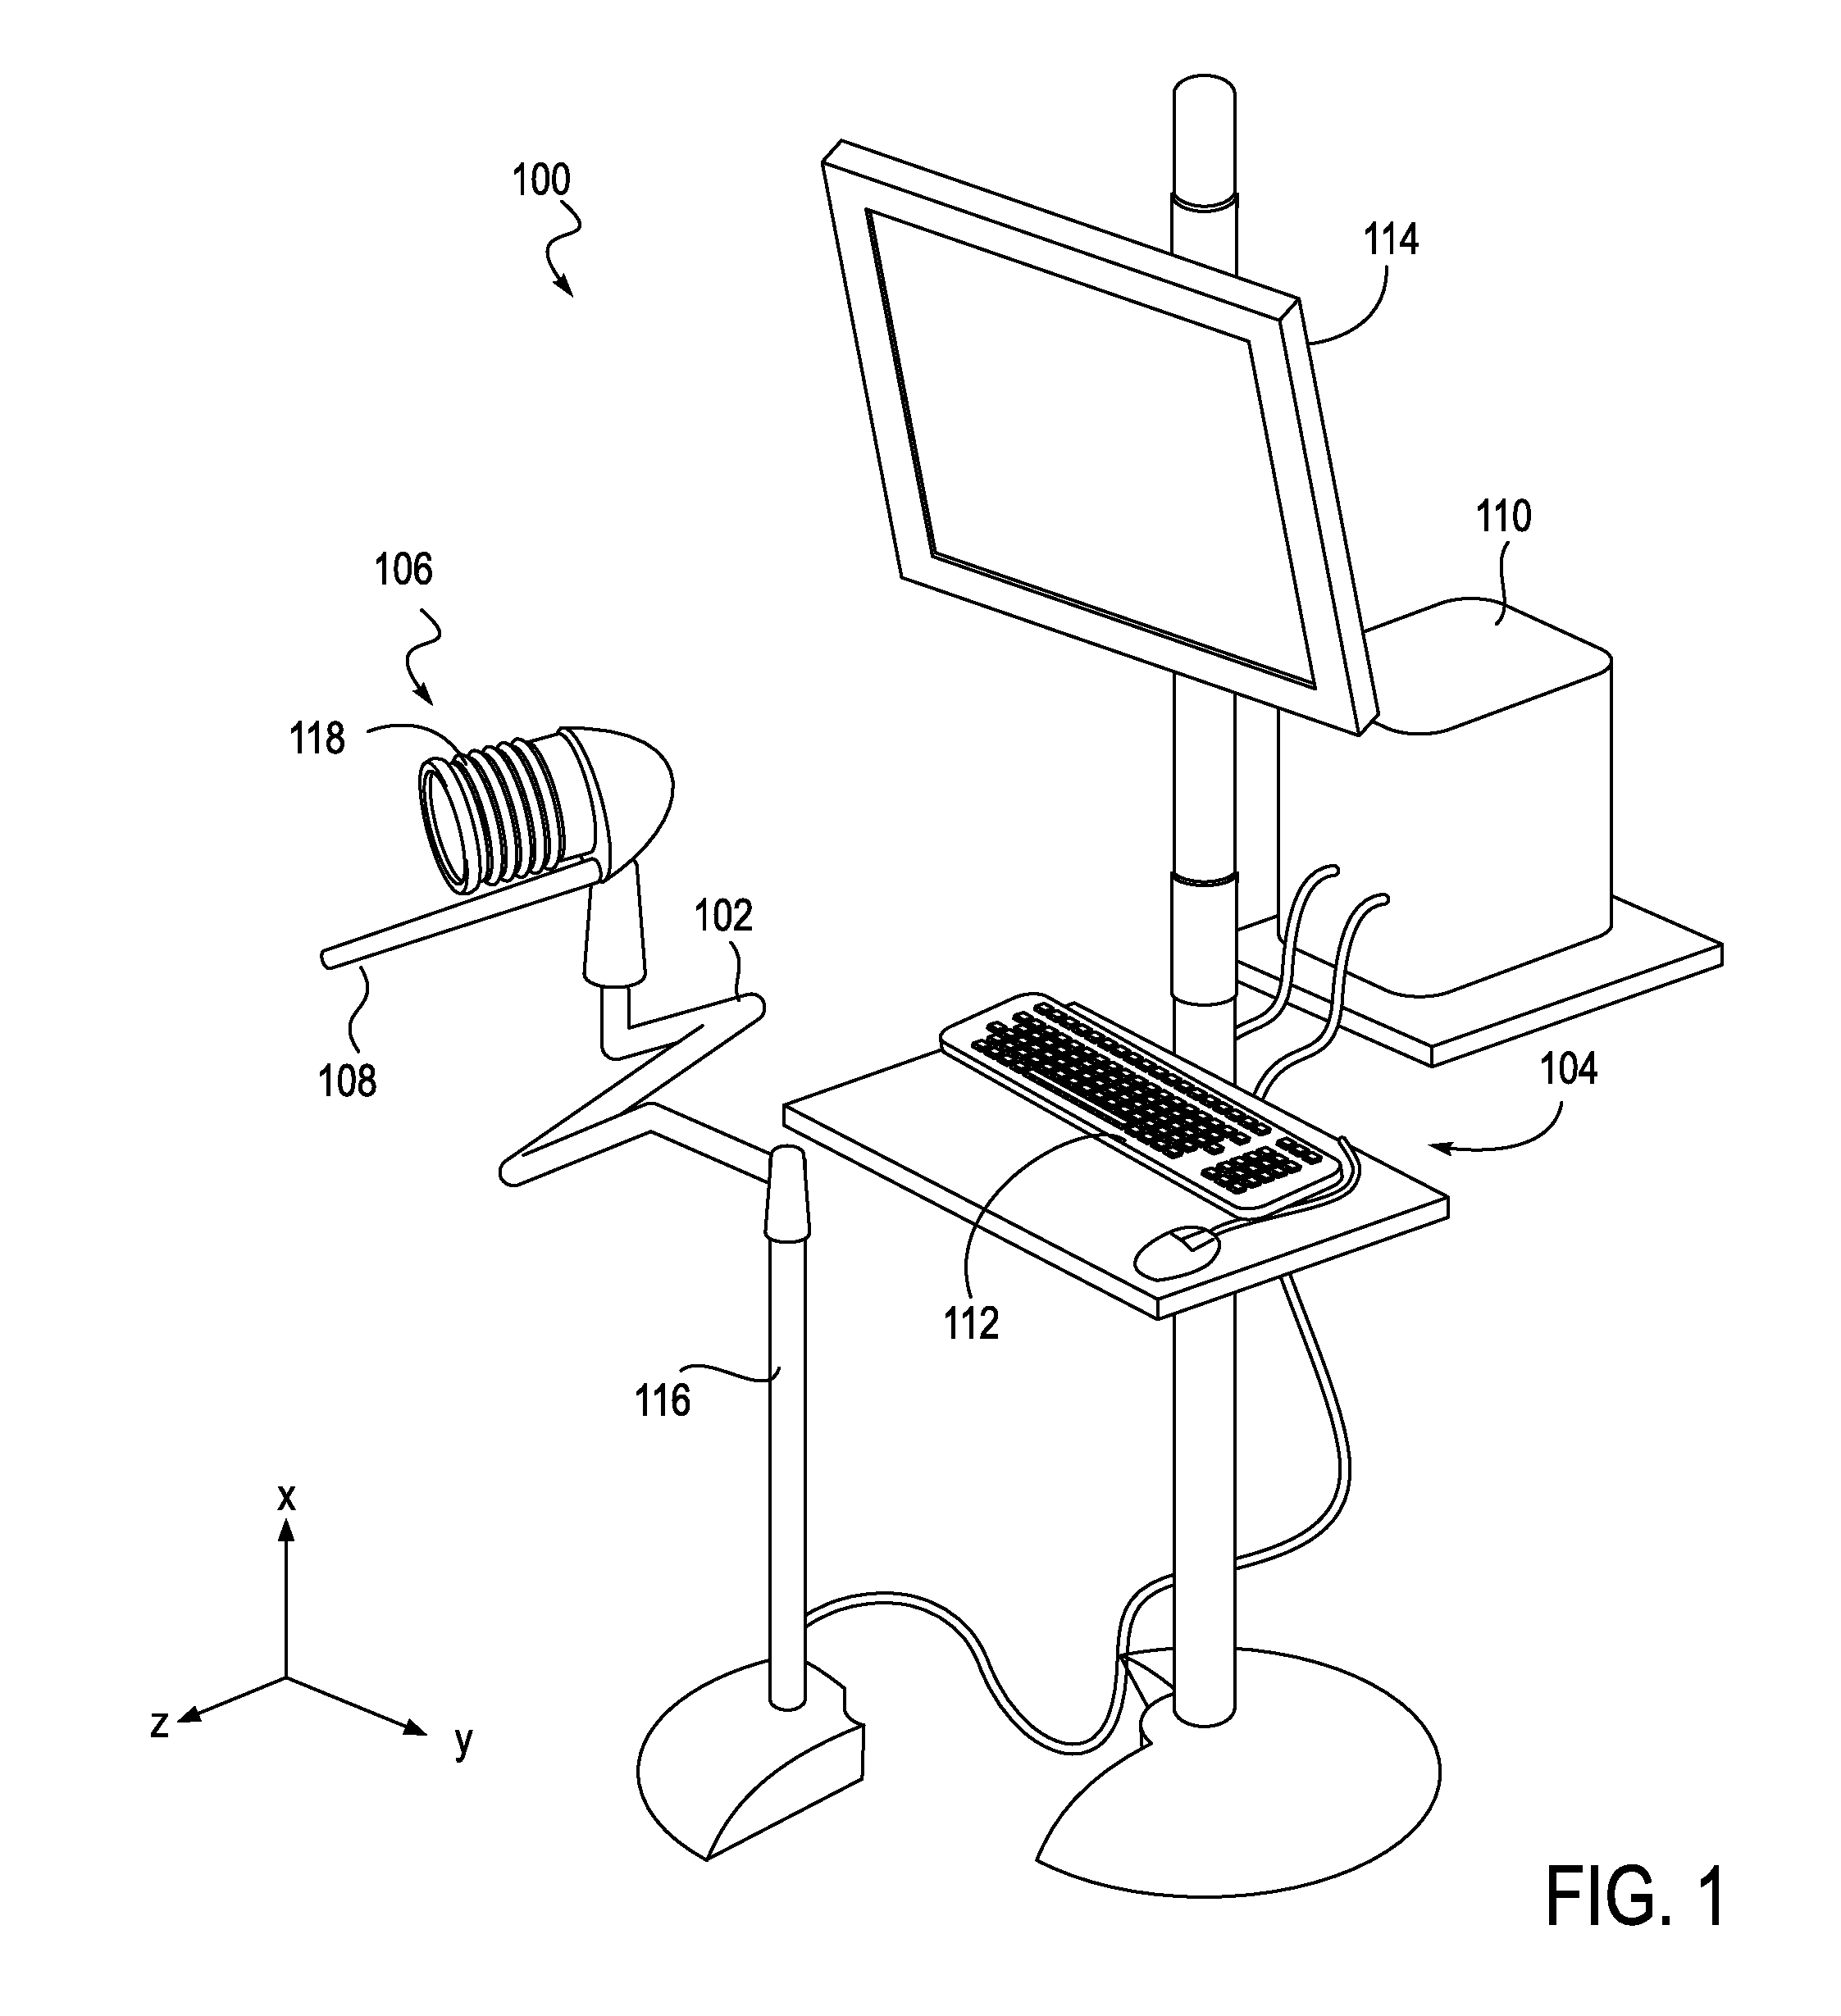 Micromanipulator control arm for therapeutic and imaging ultrasound transducers